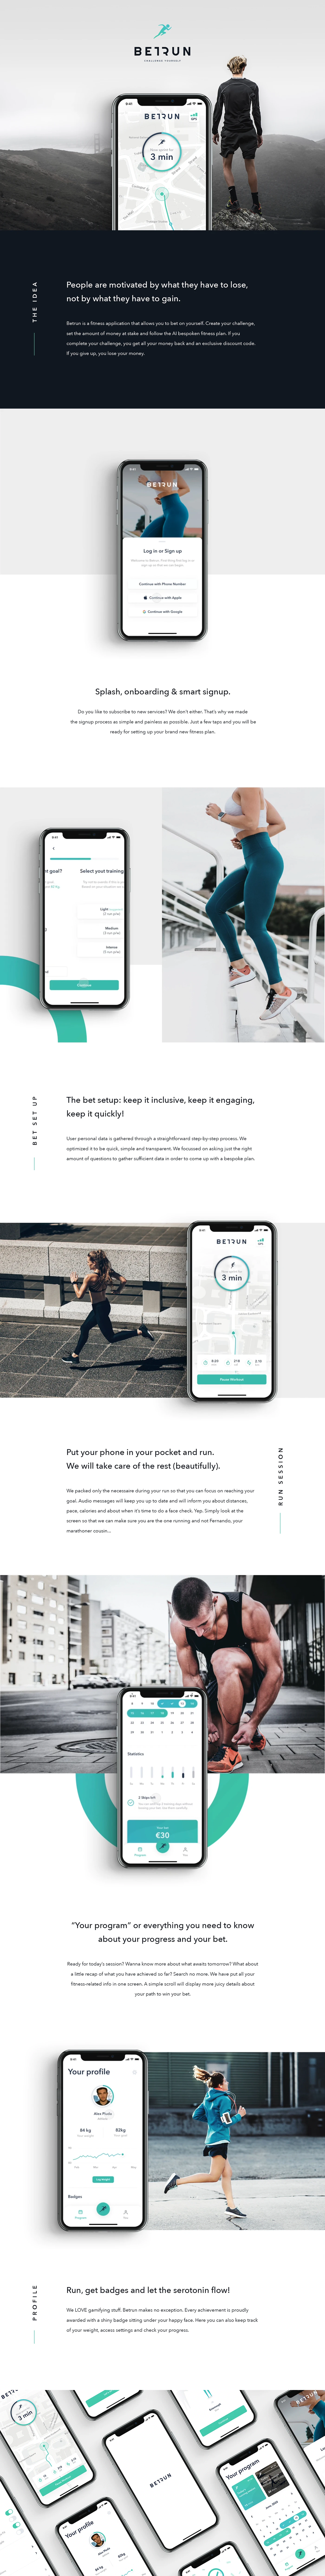 Betrun UI Kit for Sketch - Betrun is a fitness application that allows you to bet on yourself. Create your challenge, set the amount of money at stake and follow the AI bespoken fitness plan. If you complete your challenge, you get all your money back and an exclusive discount code. If you give up, you will lose your money.